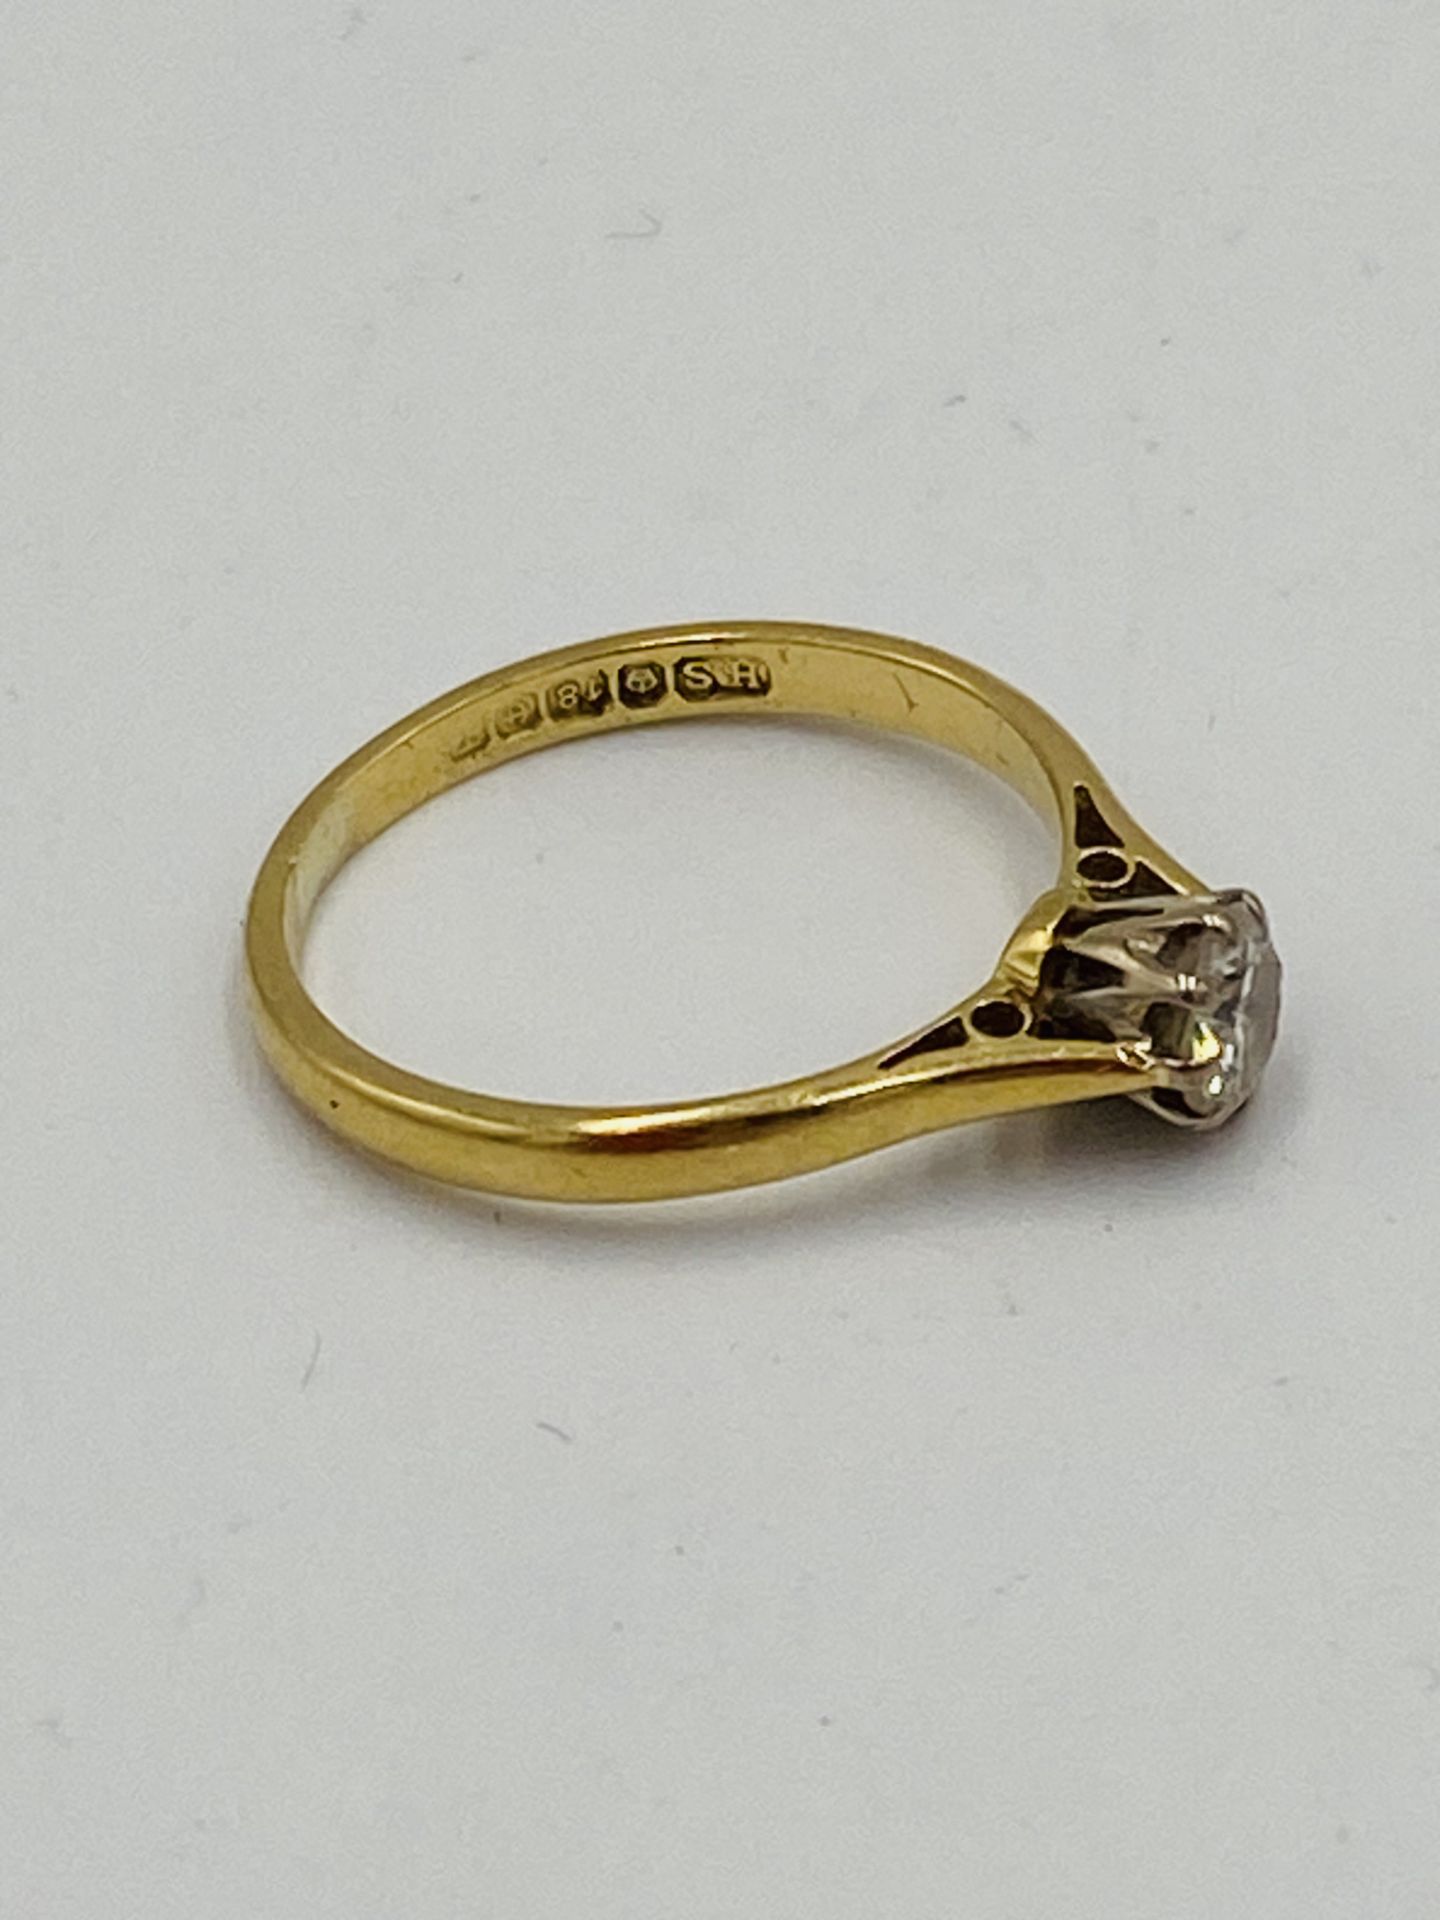 18ct gold solitaire ring - Image 4 of 6